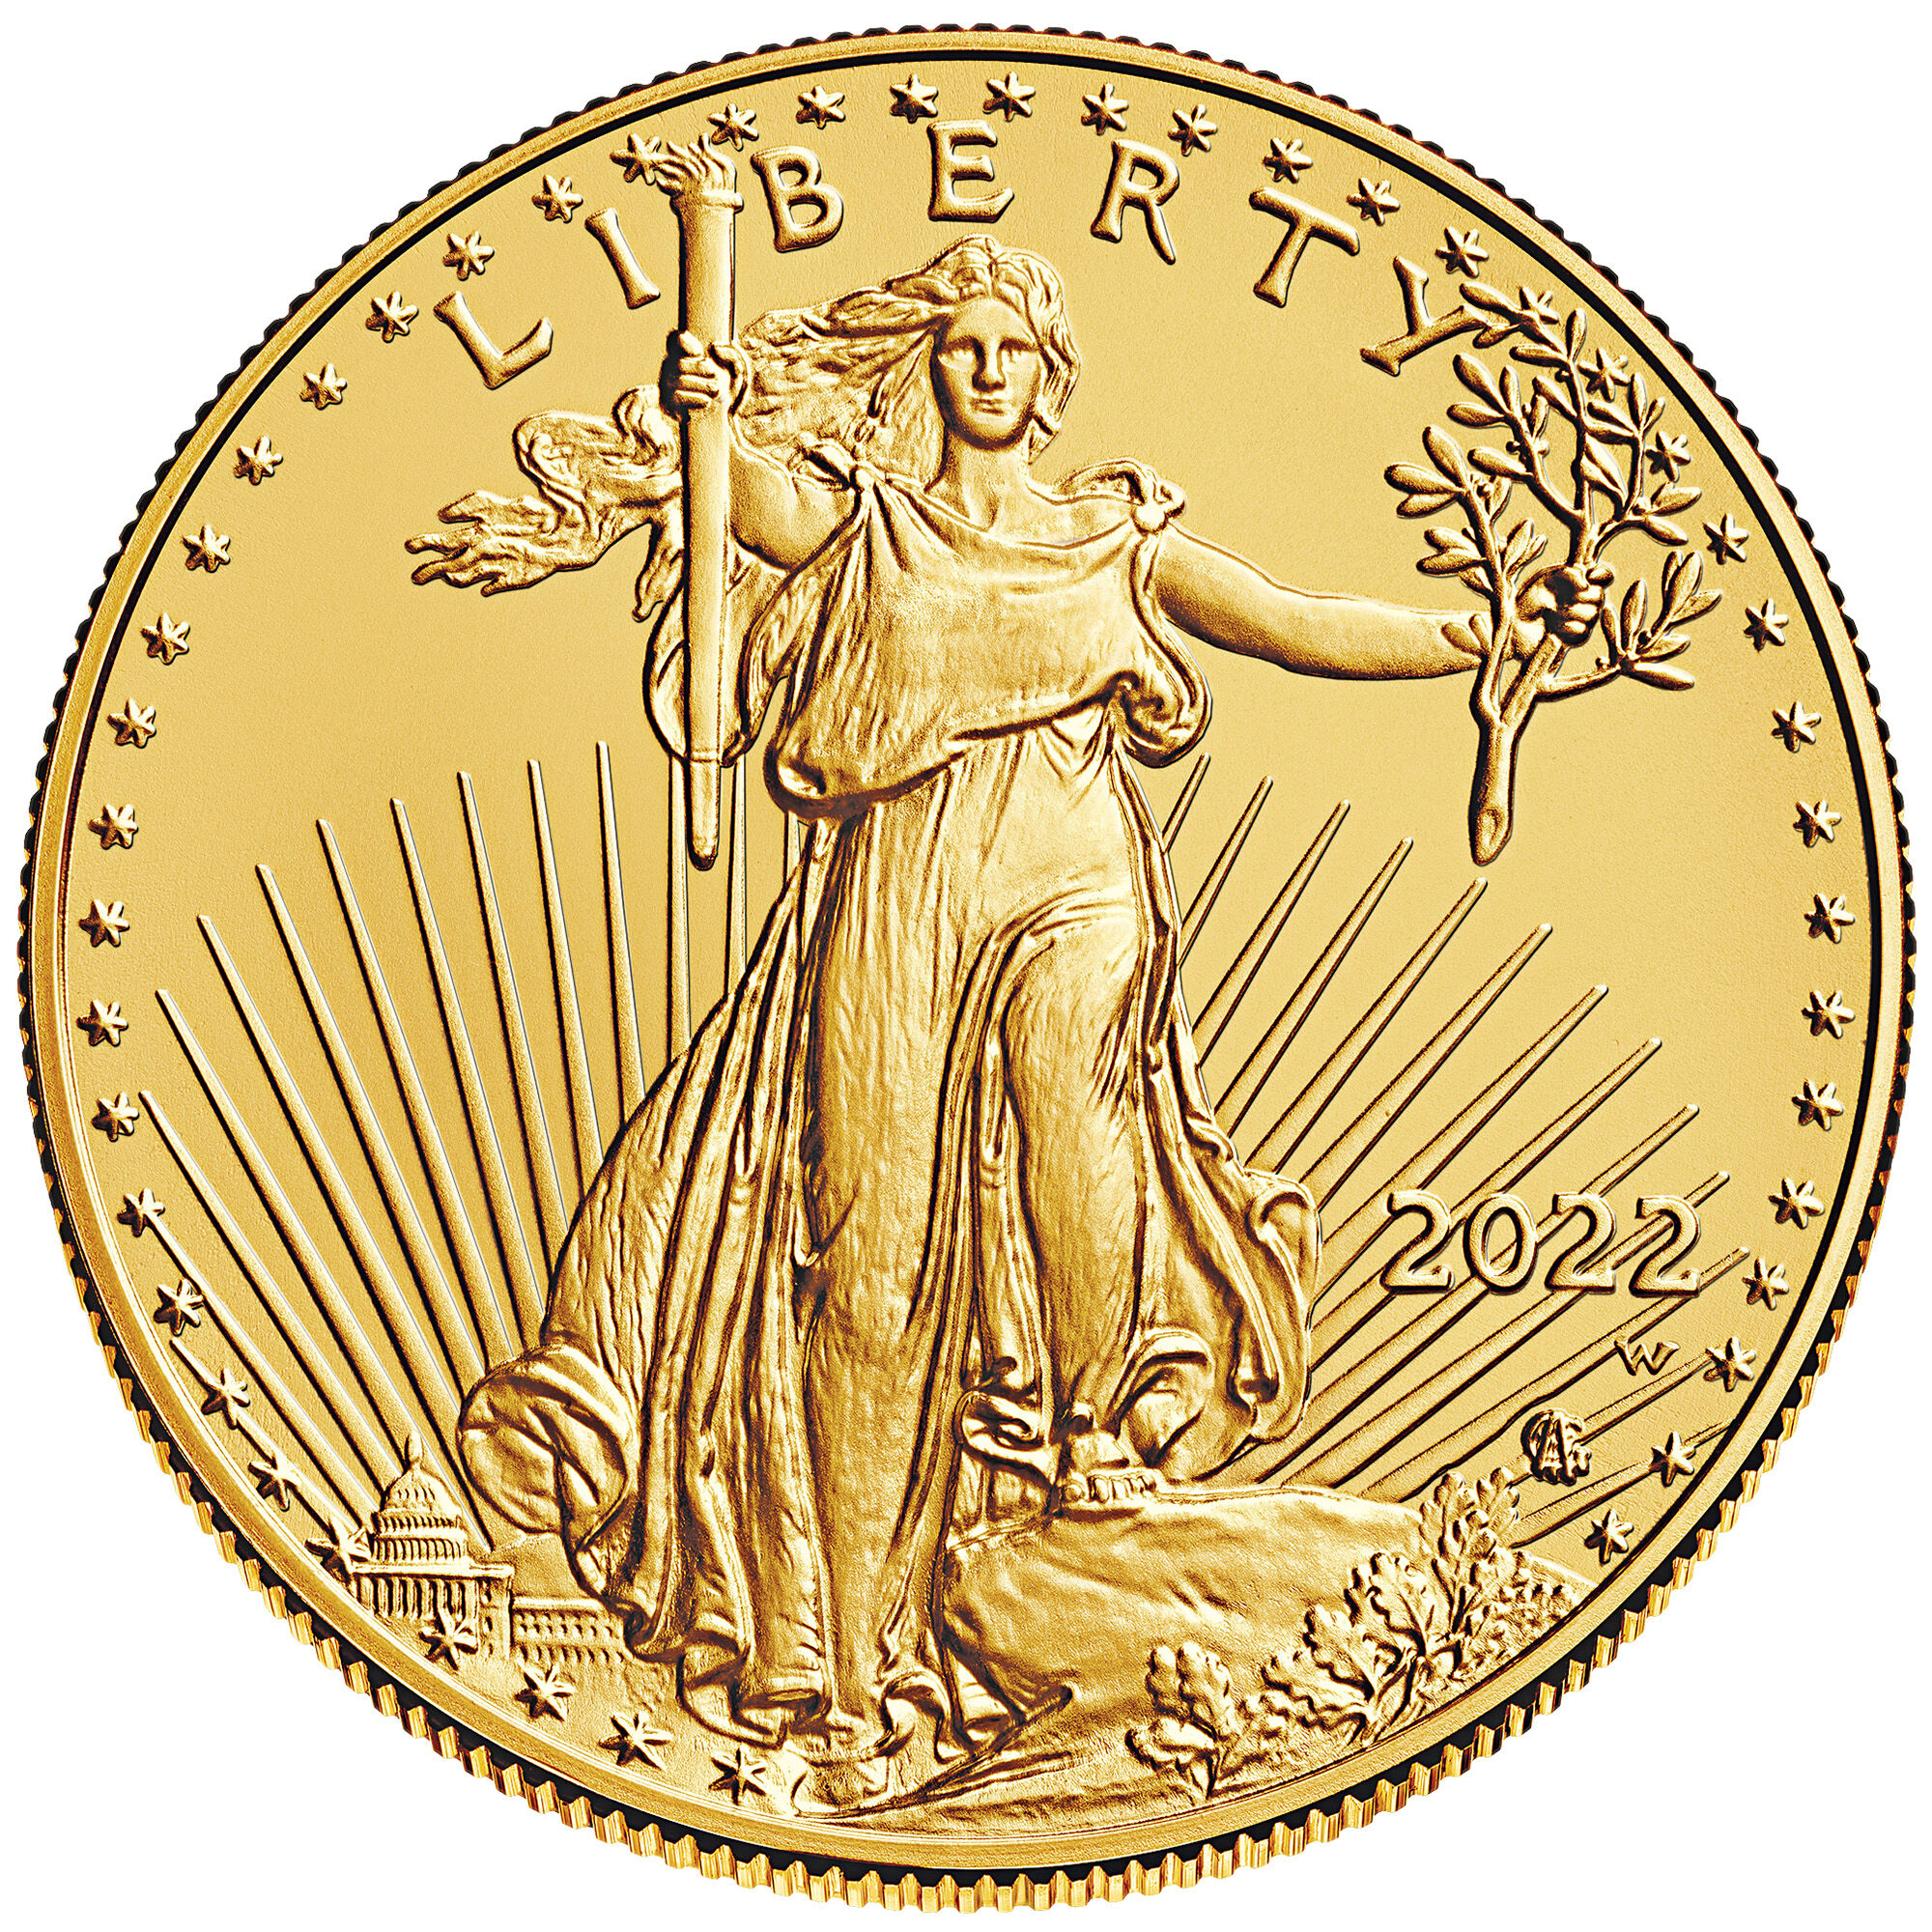 2022 early issue burnished american eagle gold coin GB2 c Coin